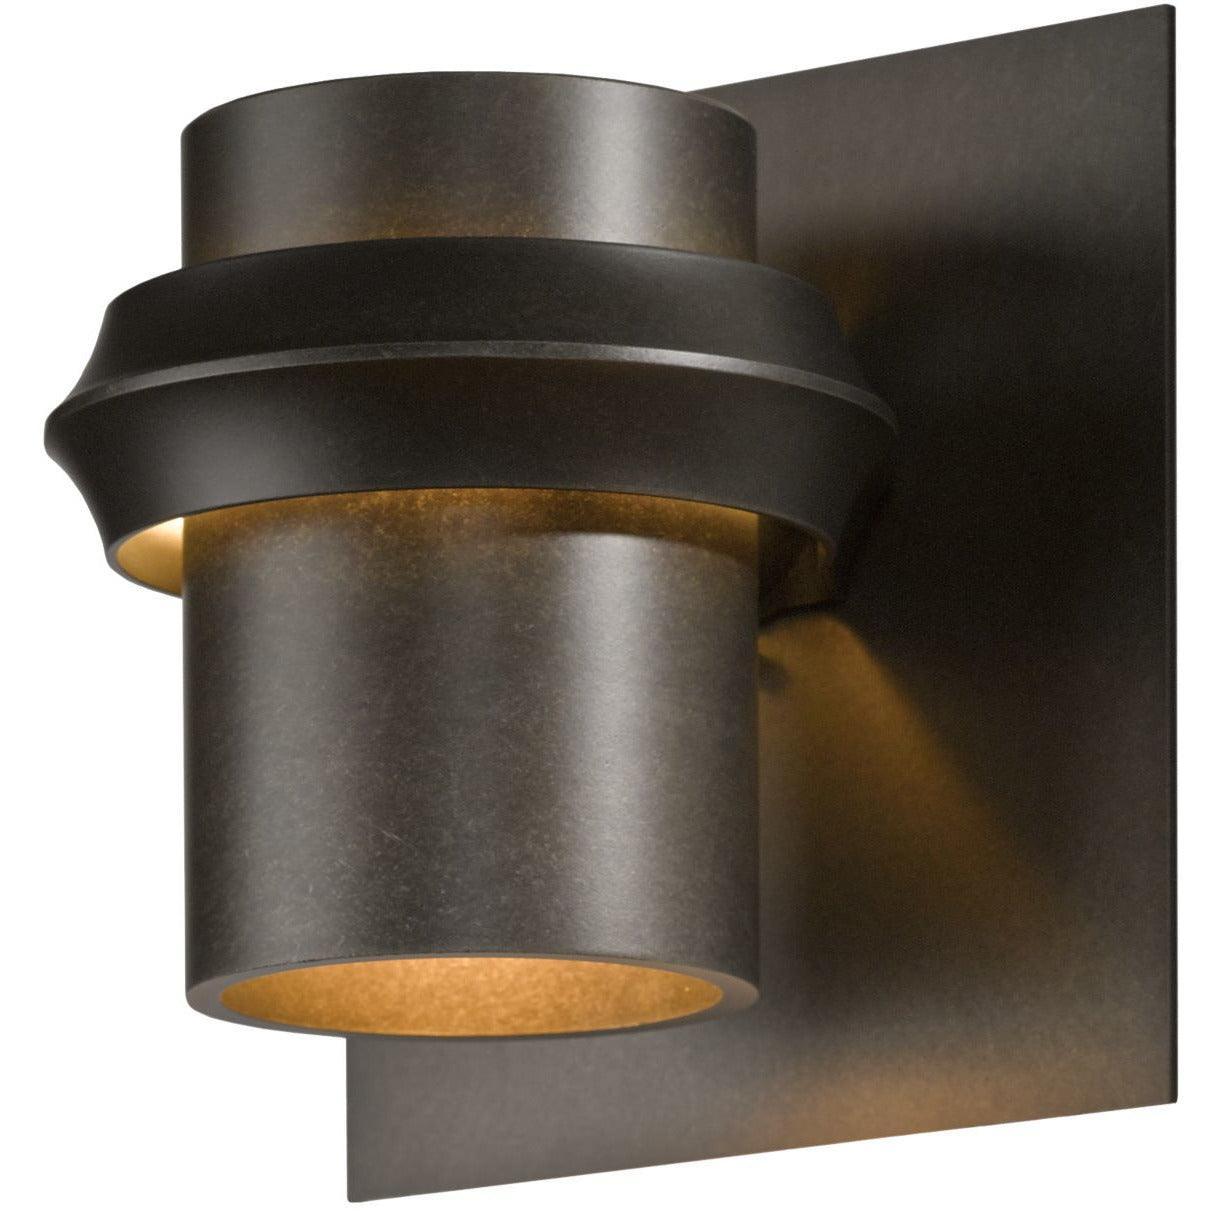 Hubbardton Forge - Twilight 8-Inch One Light Outdoor Wall Sconce - 304903-SKT-77 | Montreal Lighting & Hardware